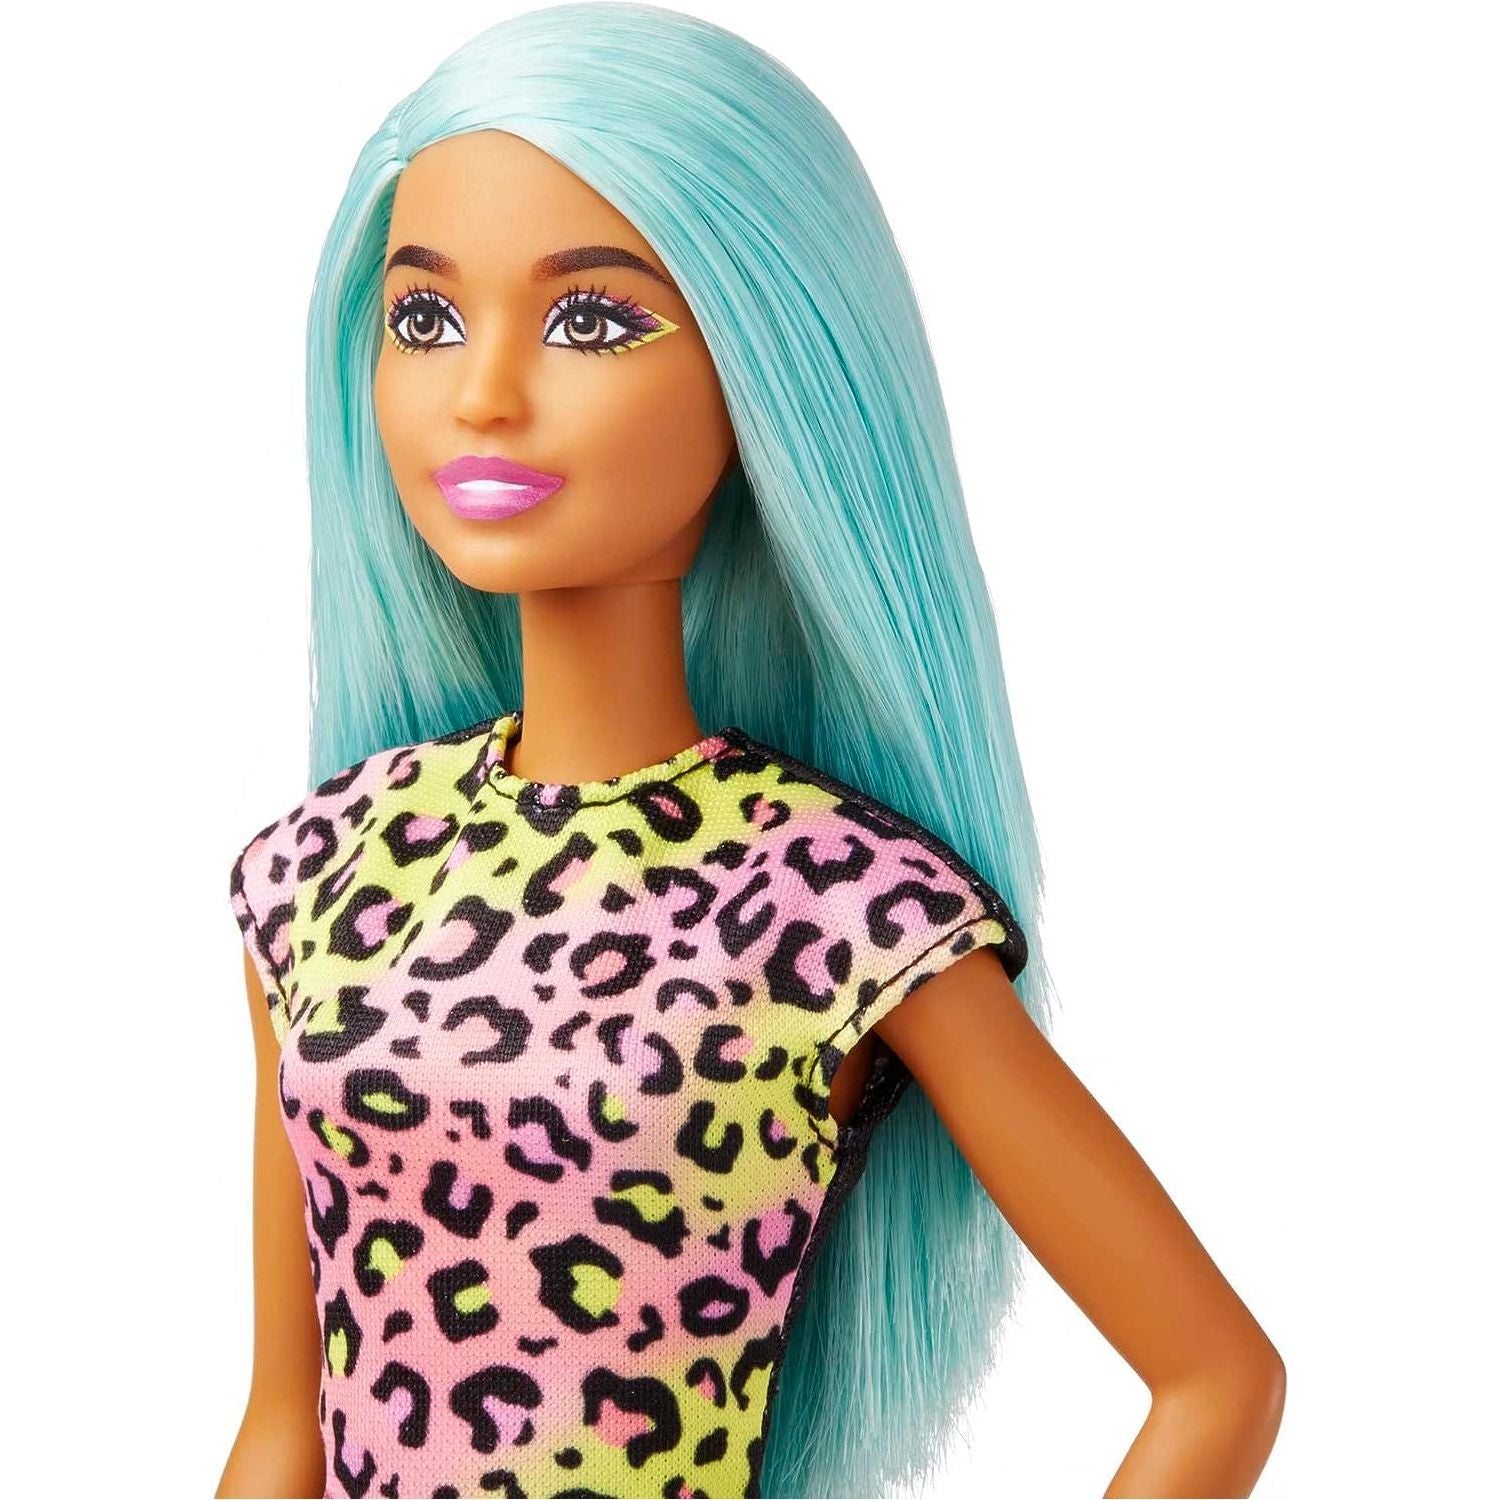 Barbie Makeup Artist Fashion Doll with Teal Hair & Art Accessories Including Palette & Brush